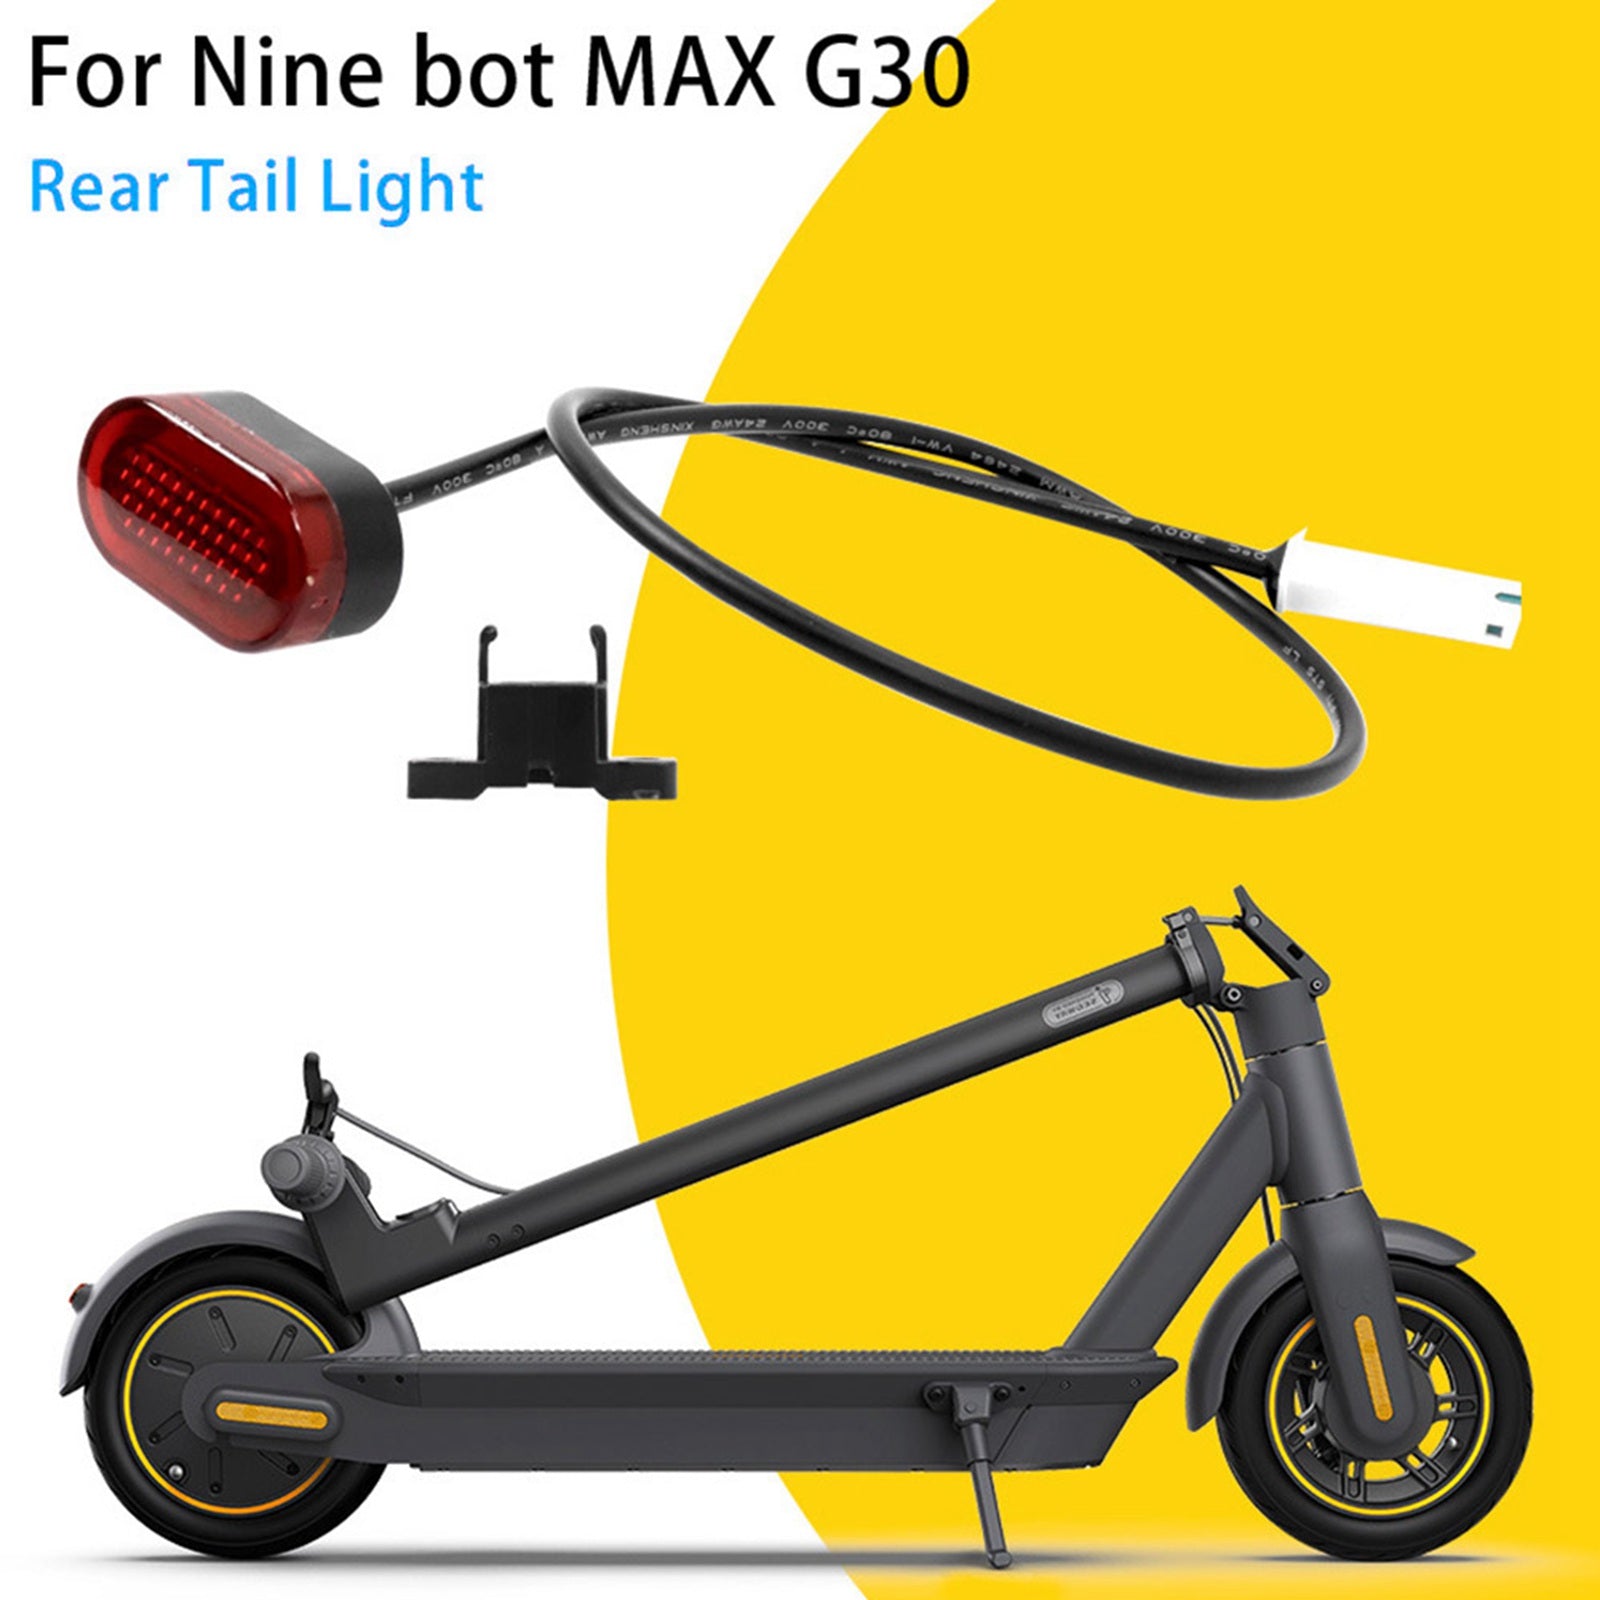 Rear Fender Tail Light for Ninebot Max G30 Electric Scooter Rear LED Light Warning Lamp